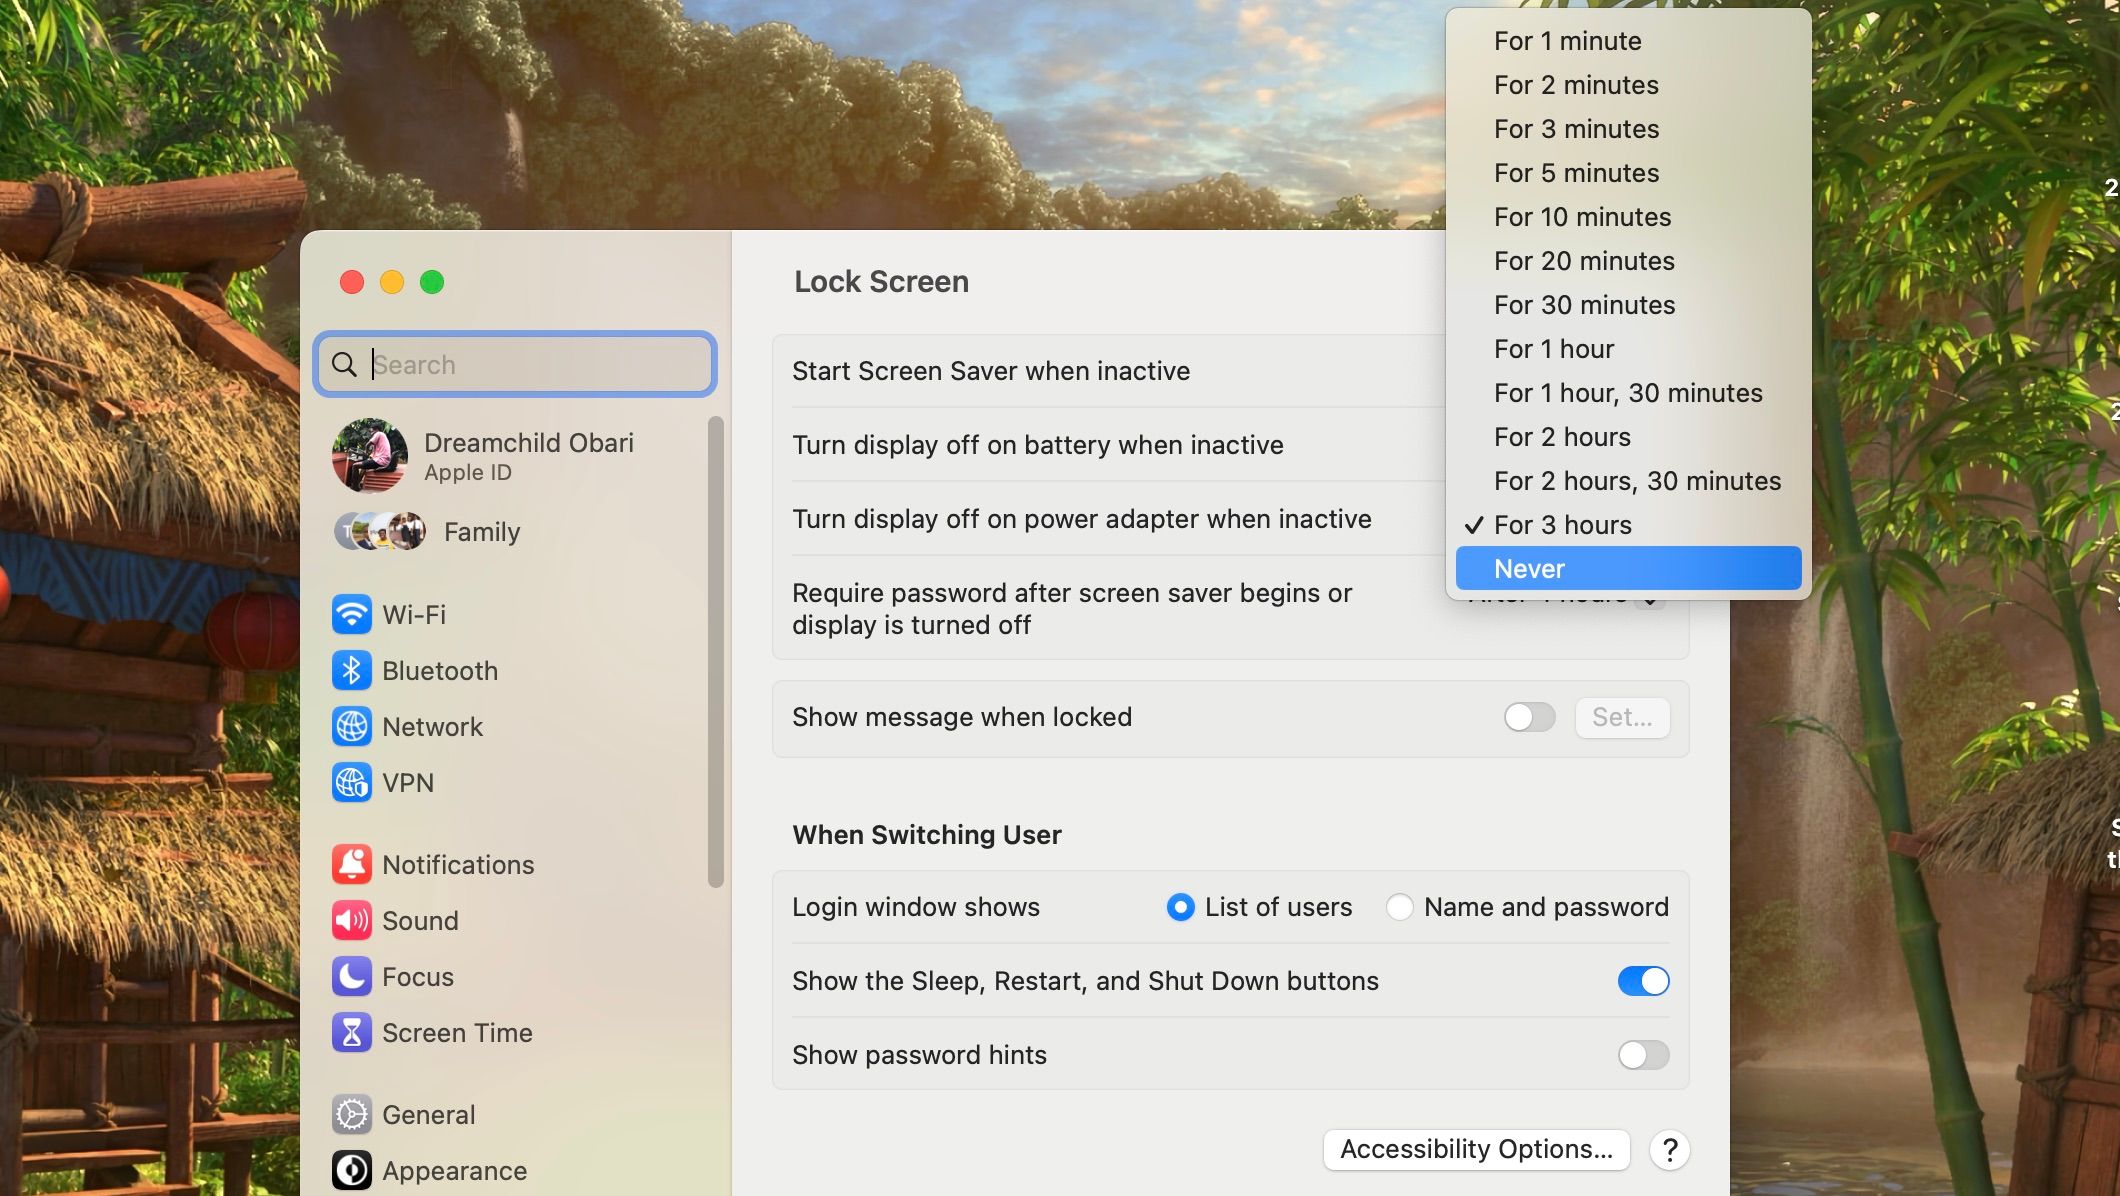 Lock screen options in the System Settings